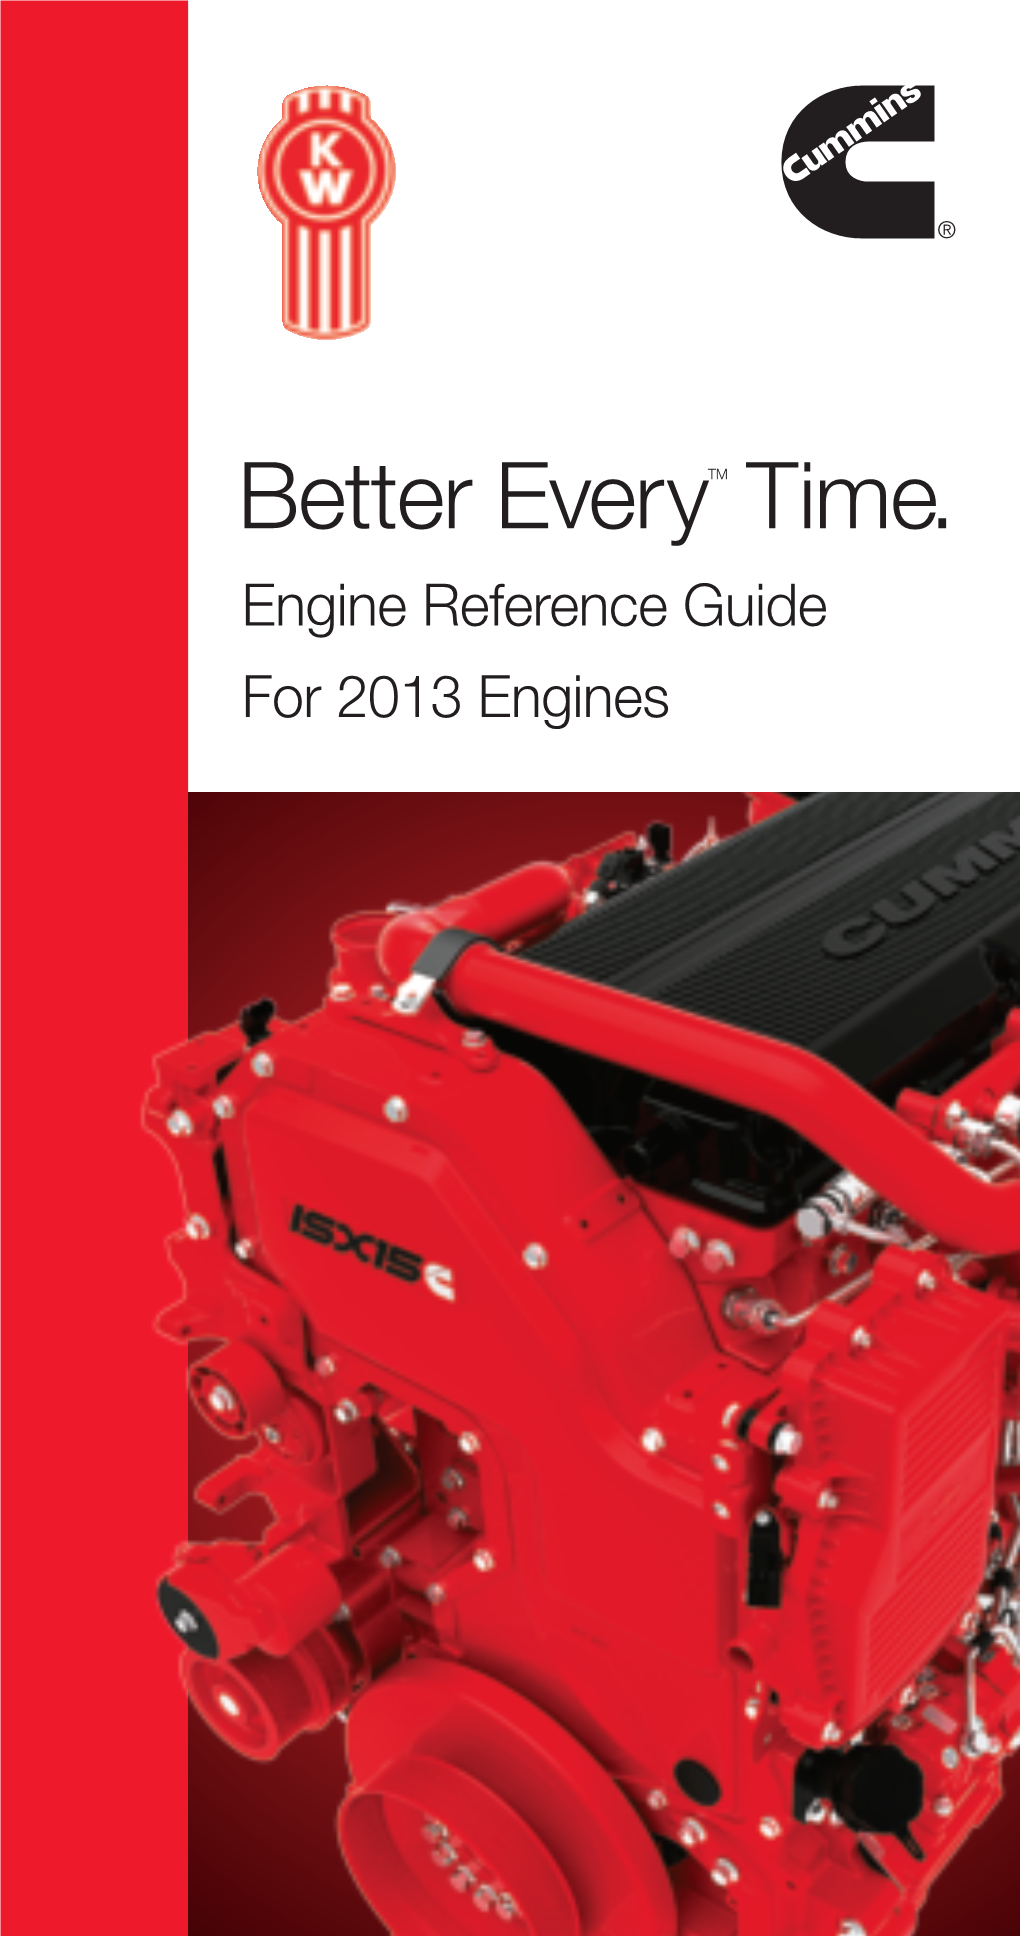 Better Everytm Time. Engine Reference Guide for 2013 Engines